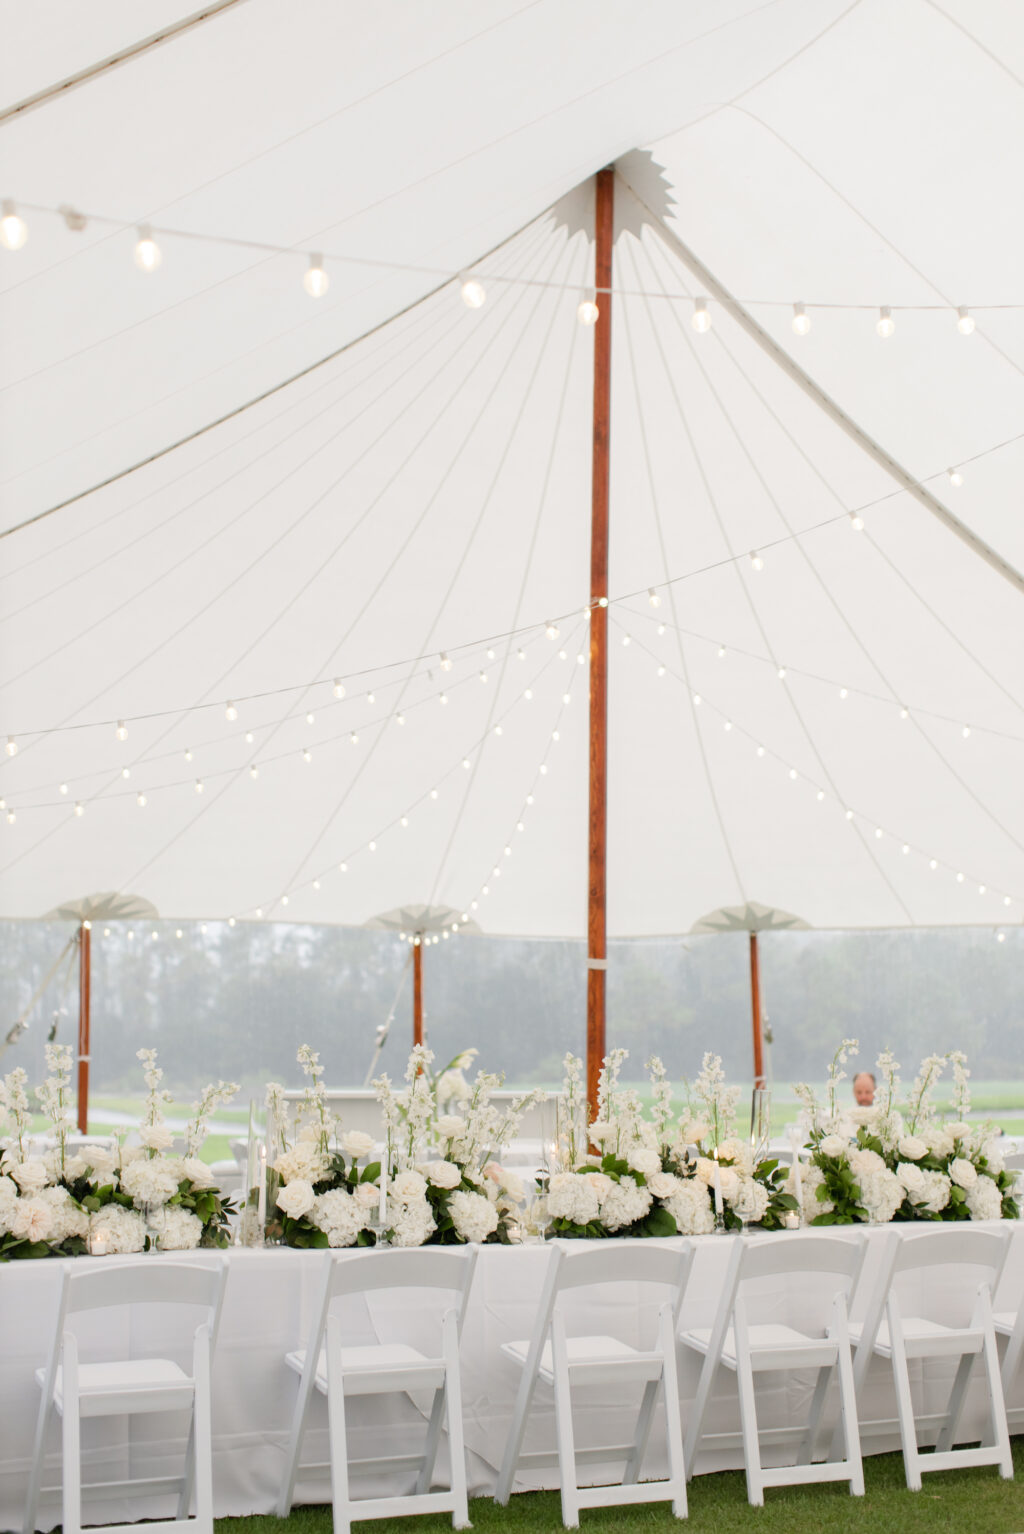 White Stock, Garden Roses, and Hydrangeas Feasting Table Centerpieces | Sailcloth Tent | Timeless Wedding Reception Inspiration | Sarasota Venue The Concession Golf Club